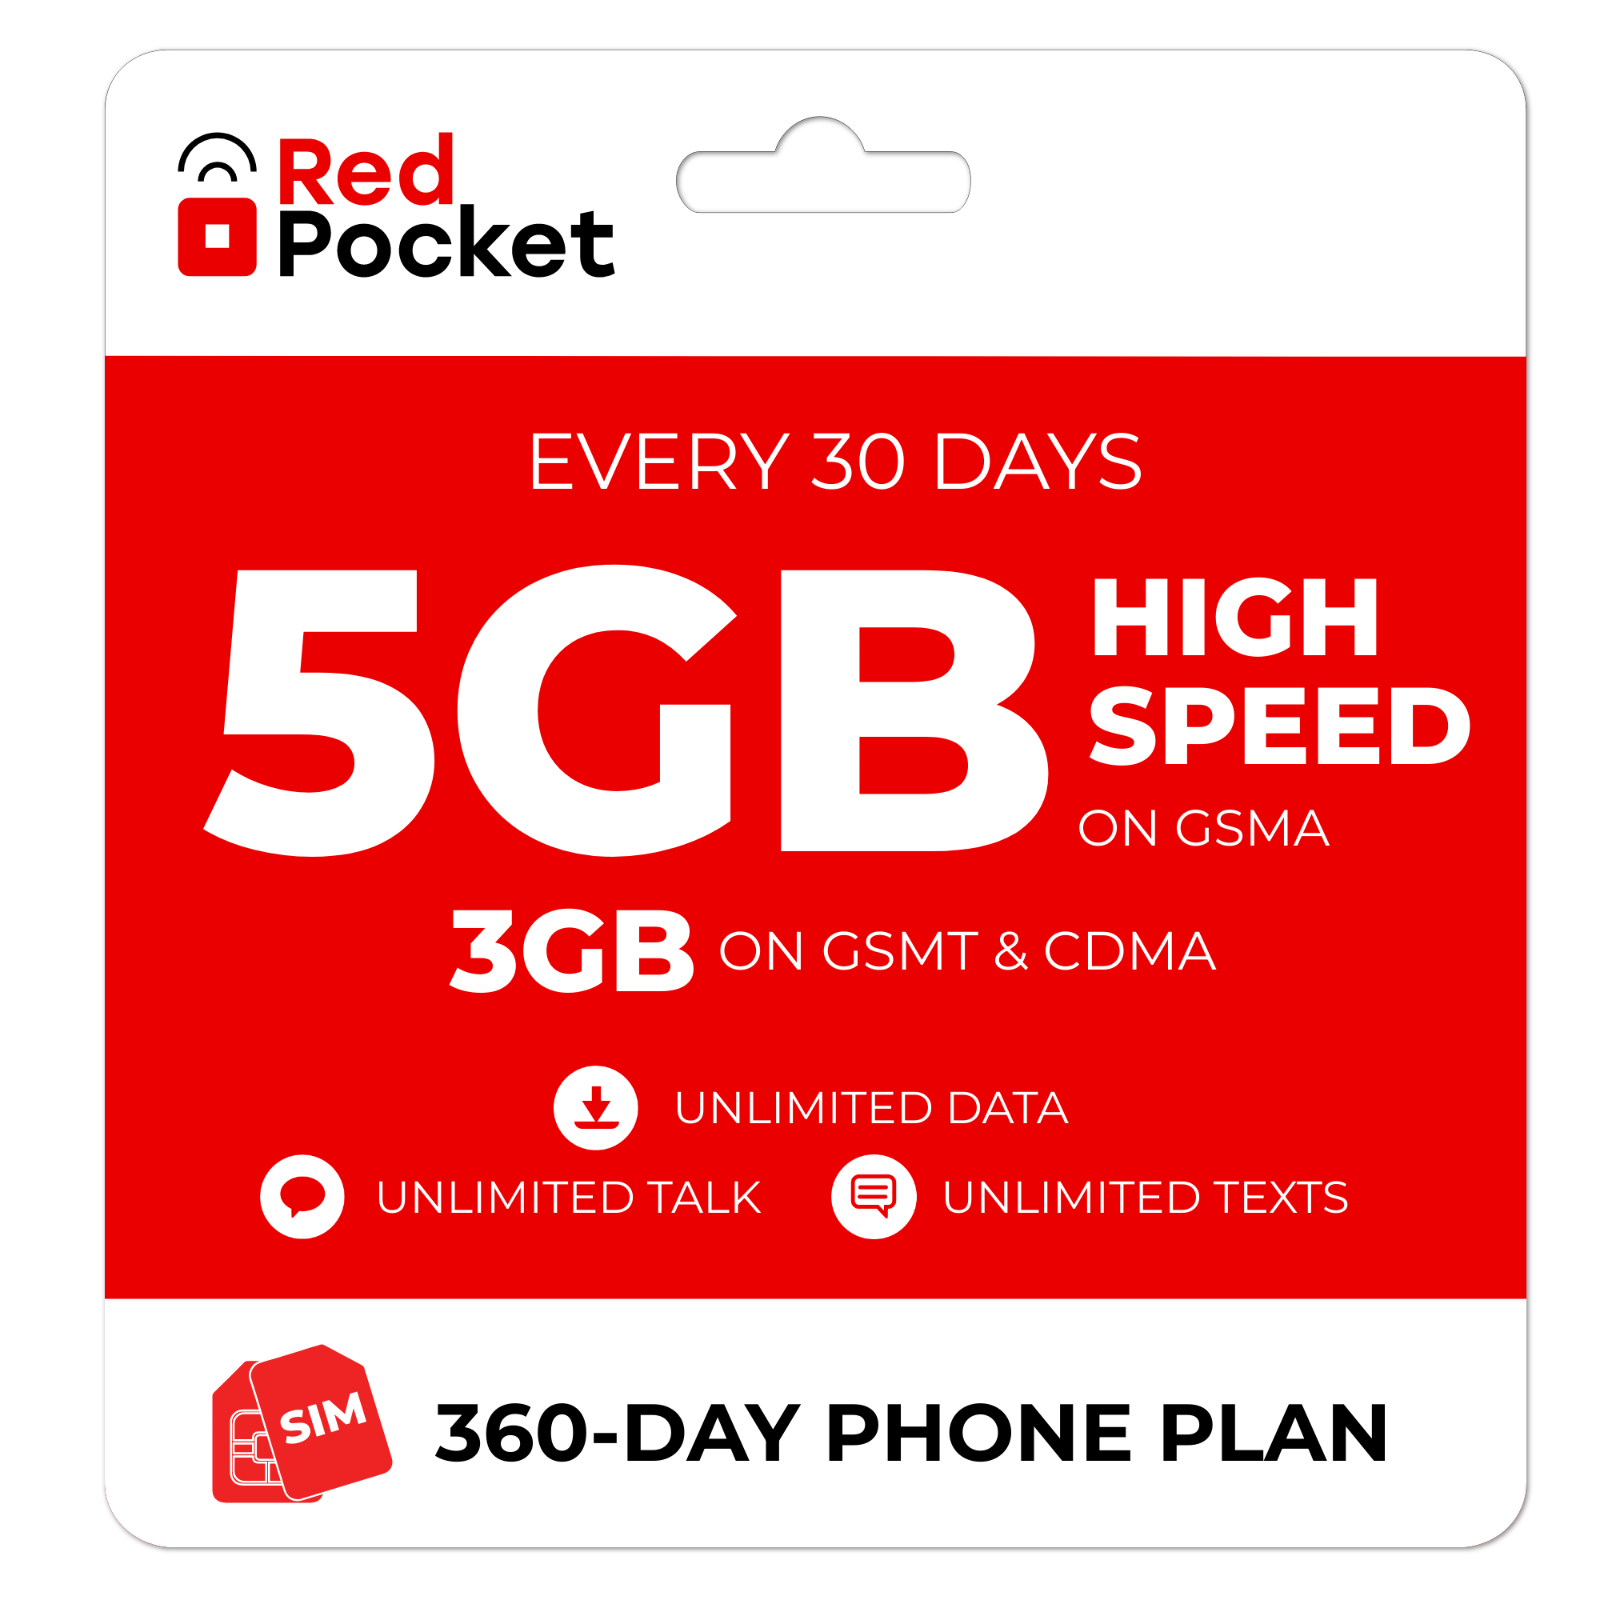 Verizon Prepaid SIM 1st month included $35/$45/$60/$70 *$10 off Unlimited  plans*